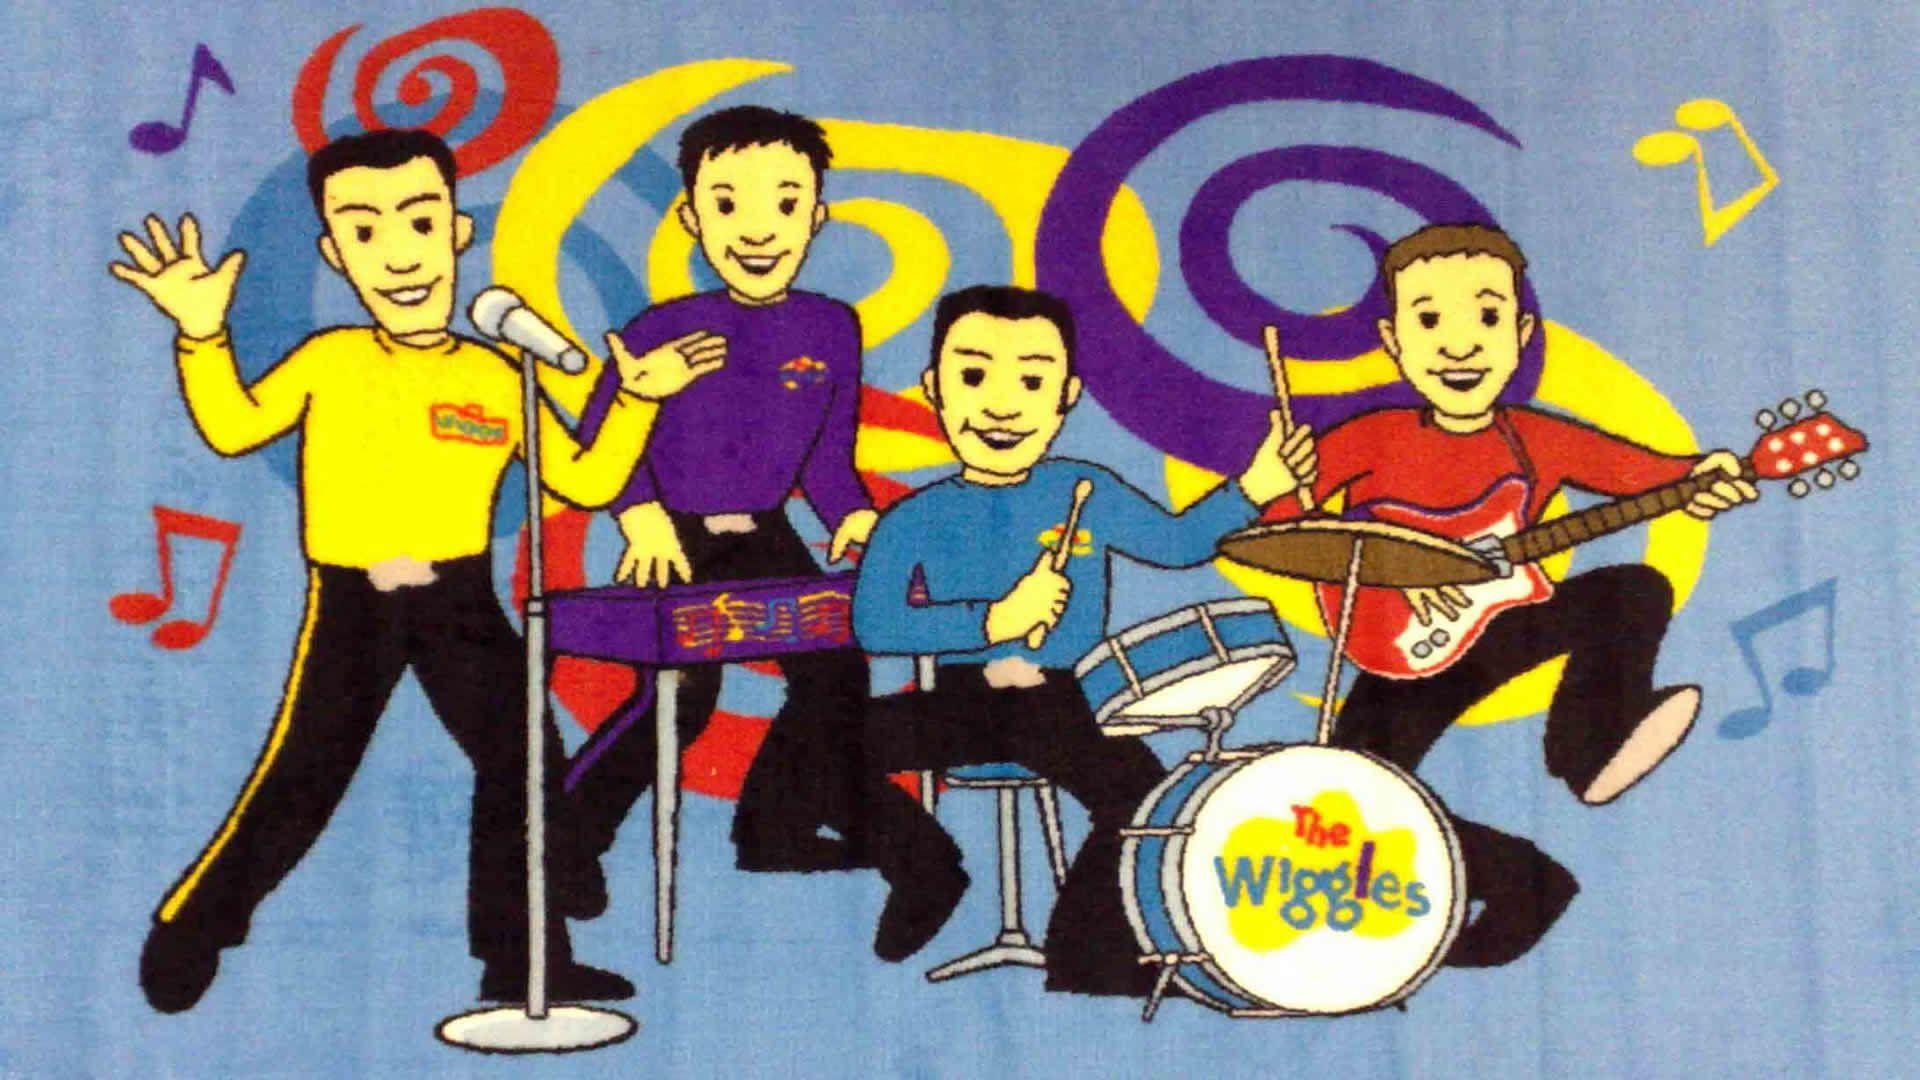 The Wiggles: Space Dancing (2003) • Movies.film Cine.com